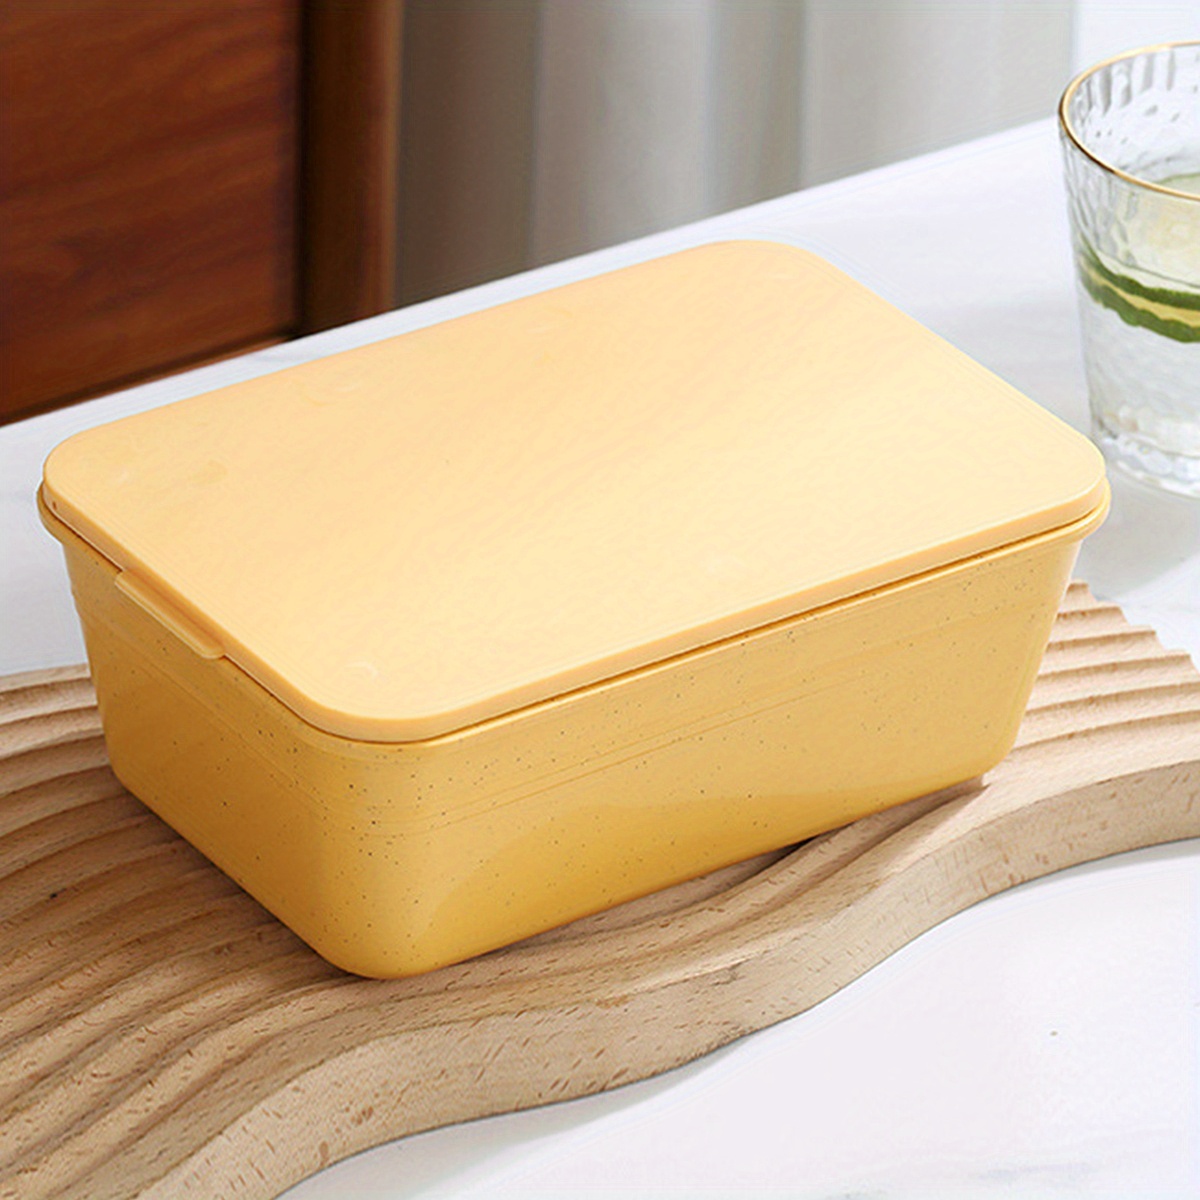 Tupperware Large Yellow Rectangular Container With Lid